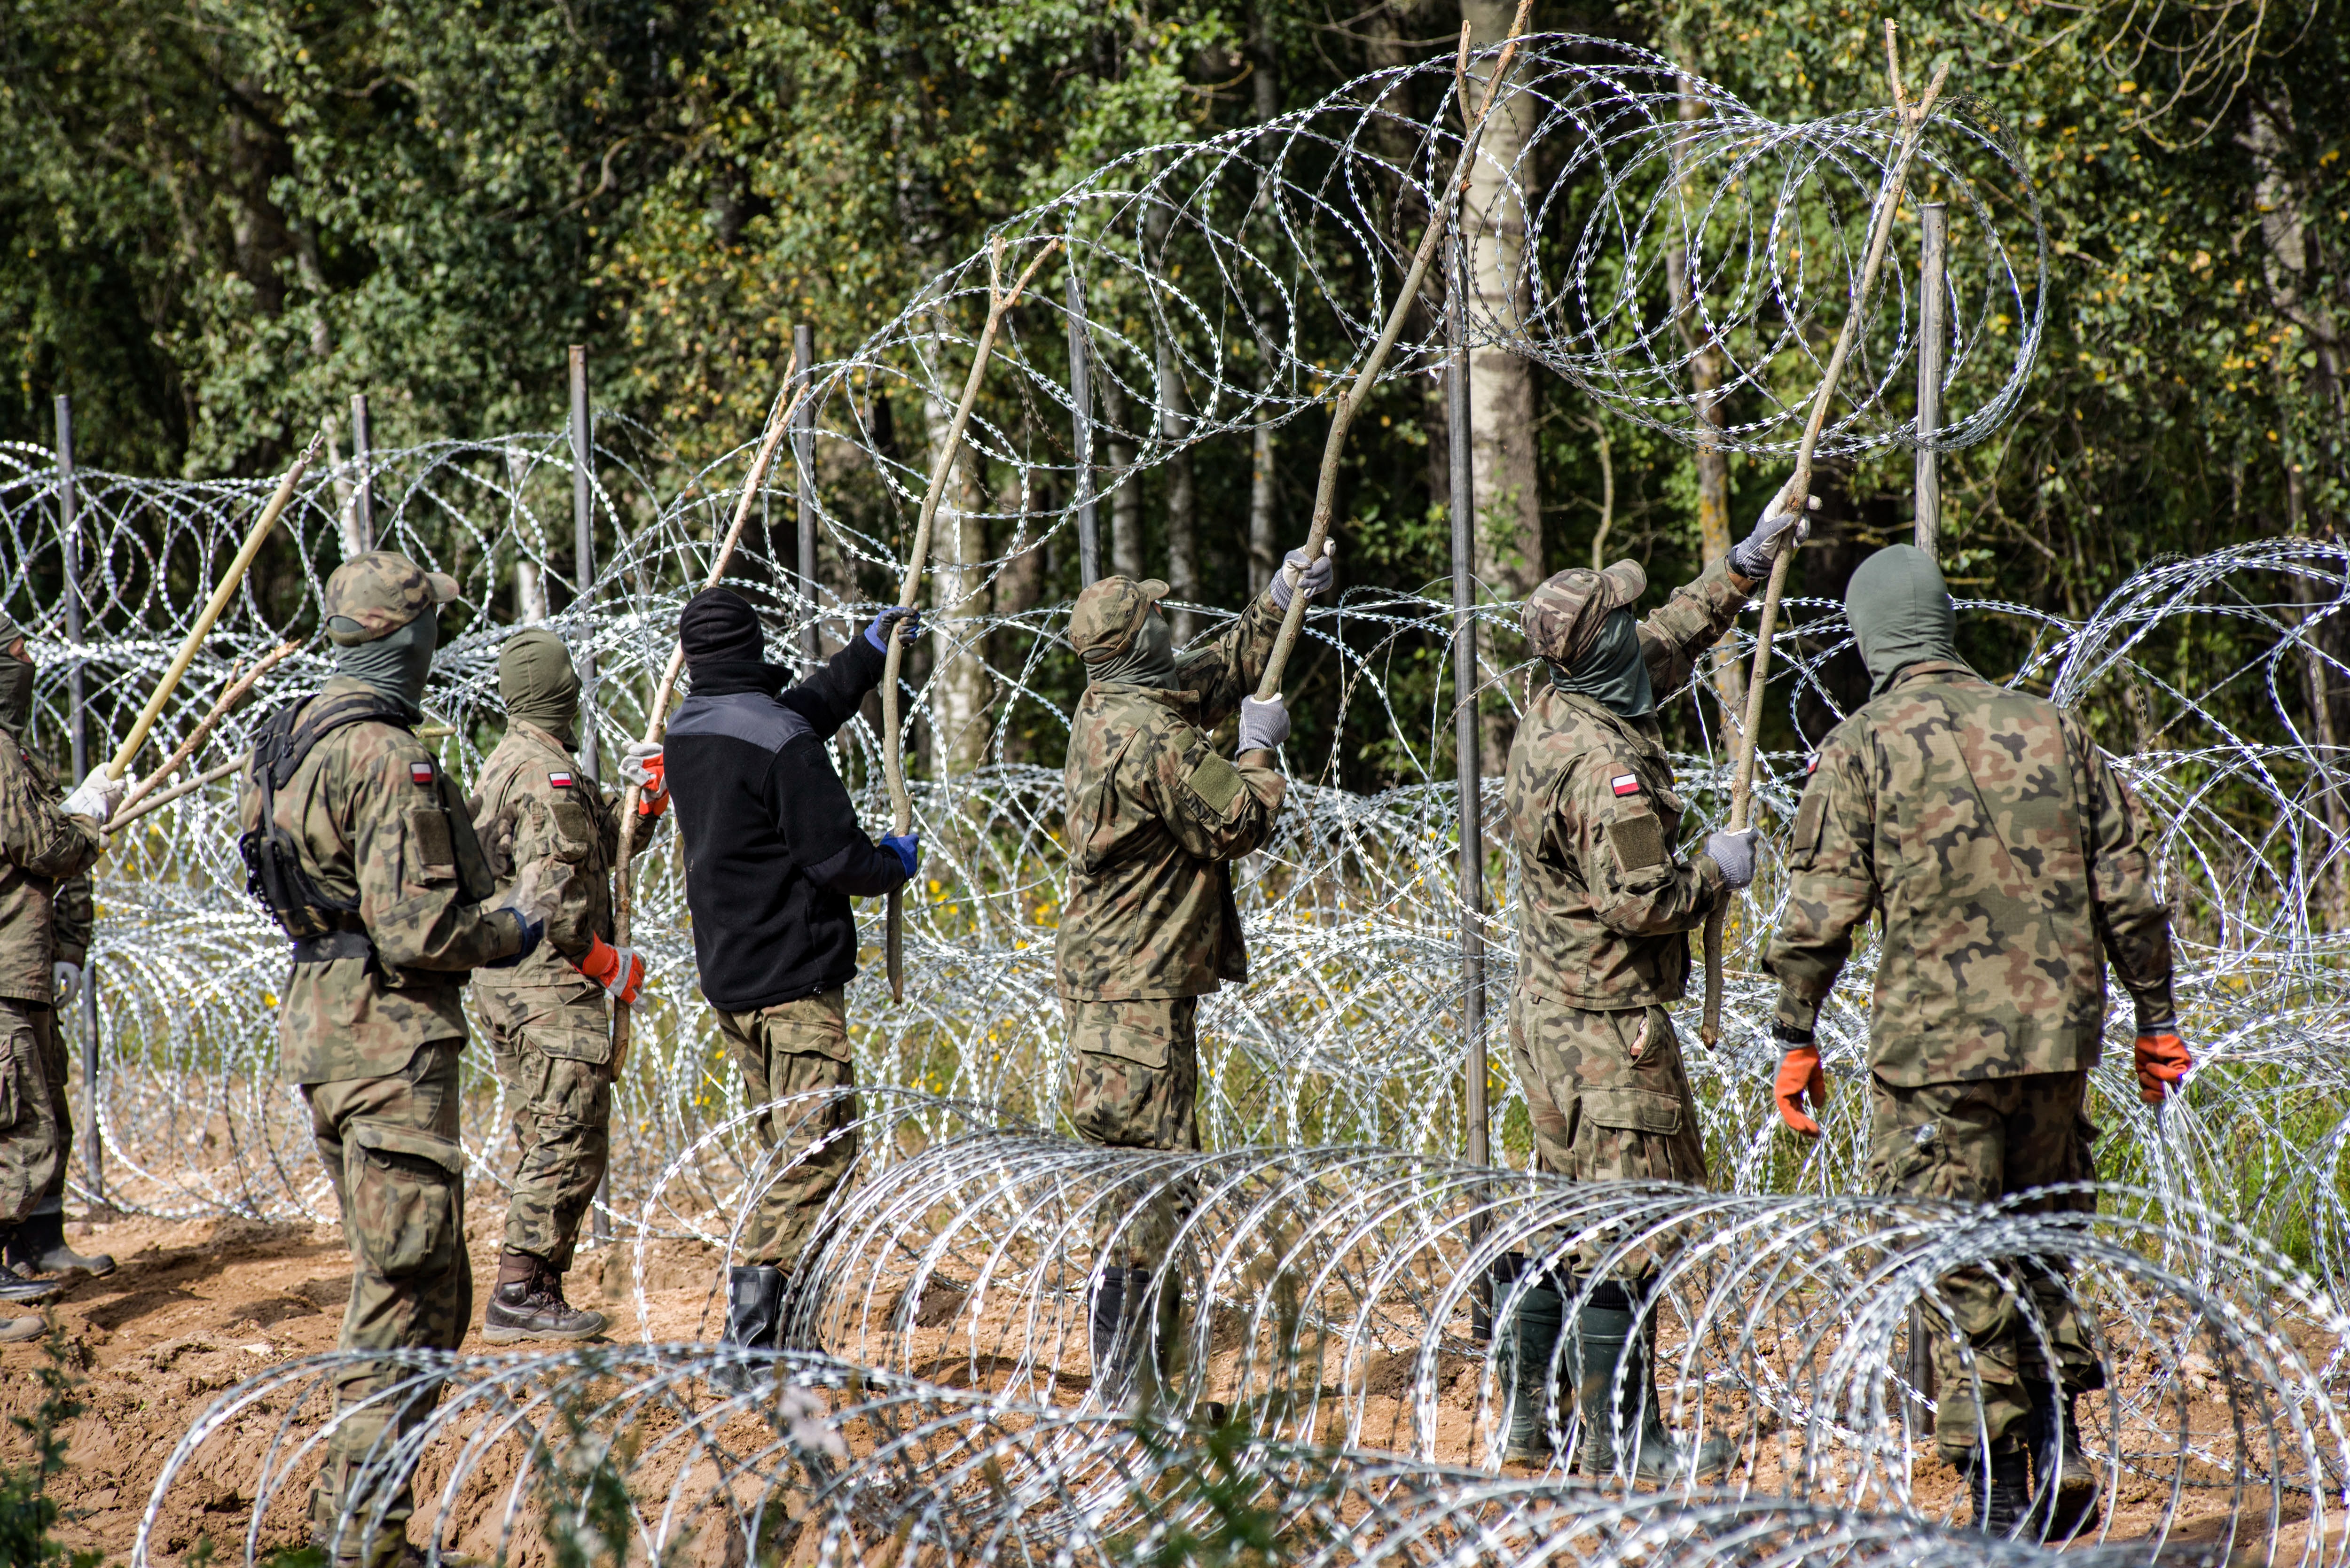 Poland has started building a barbed wire fence to curb the flow of migrants from countries such as Iraq and Afghanistan.